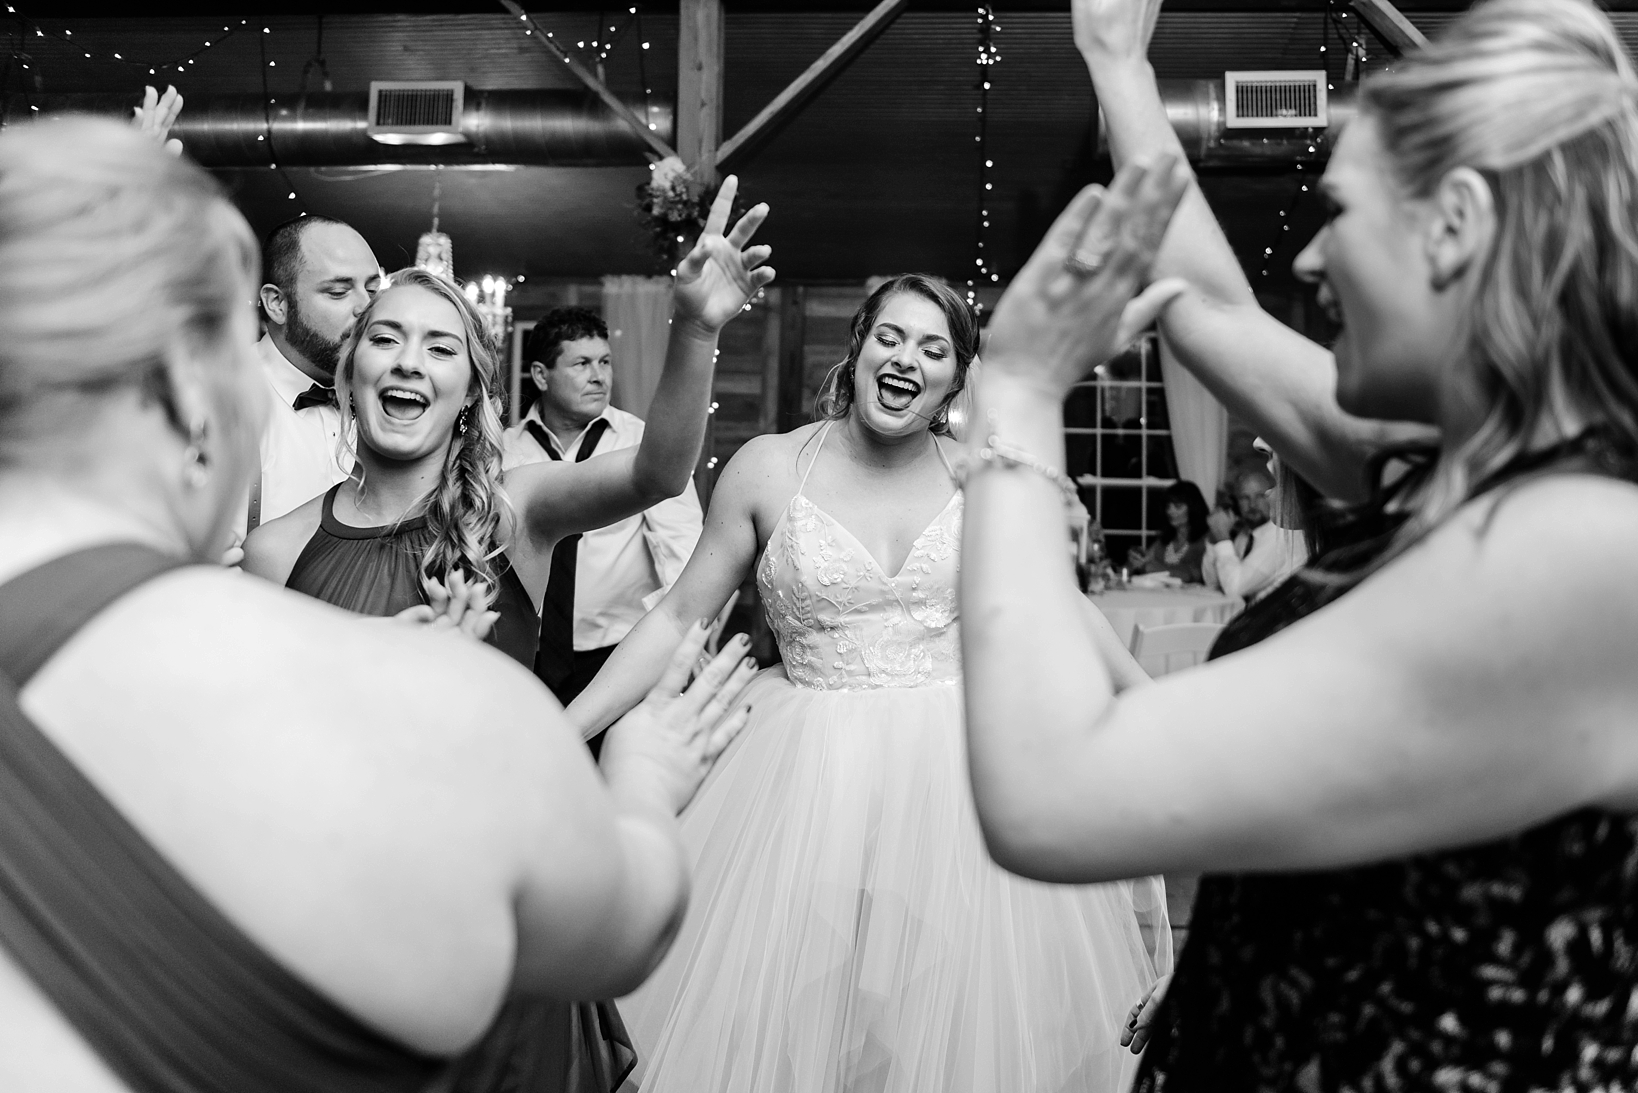 Bride having a genuine moment on the dance floor with her guests